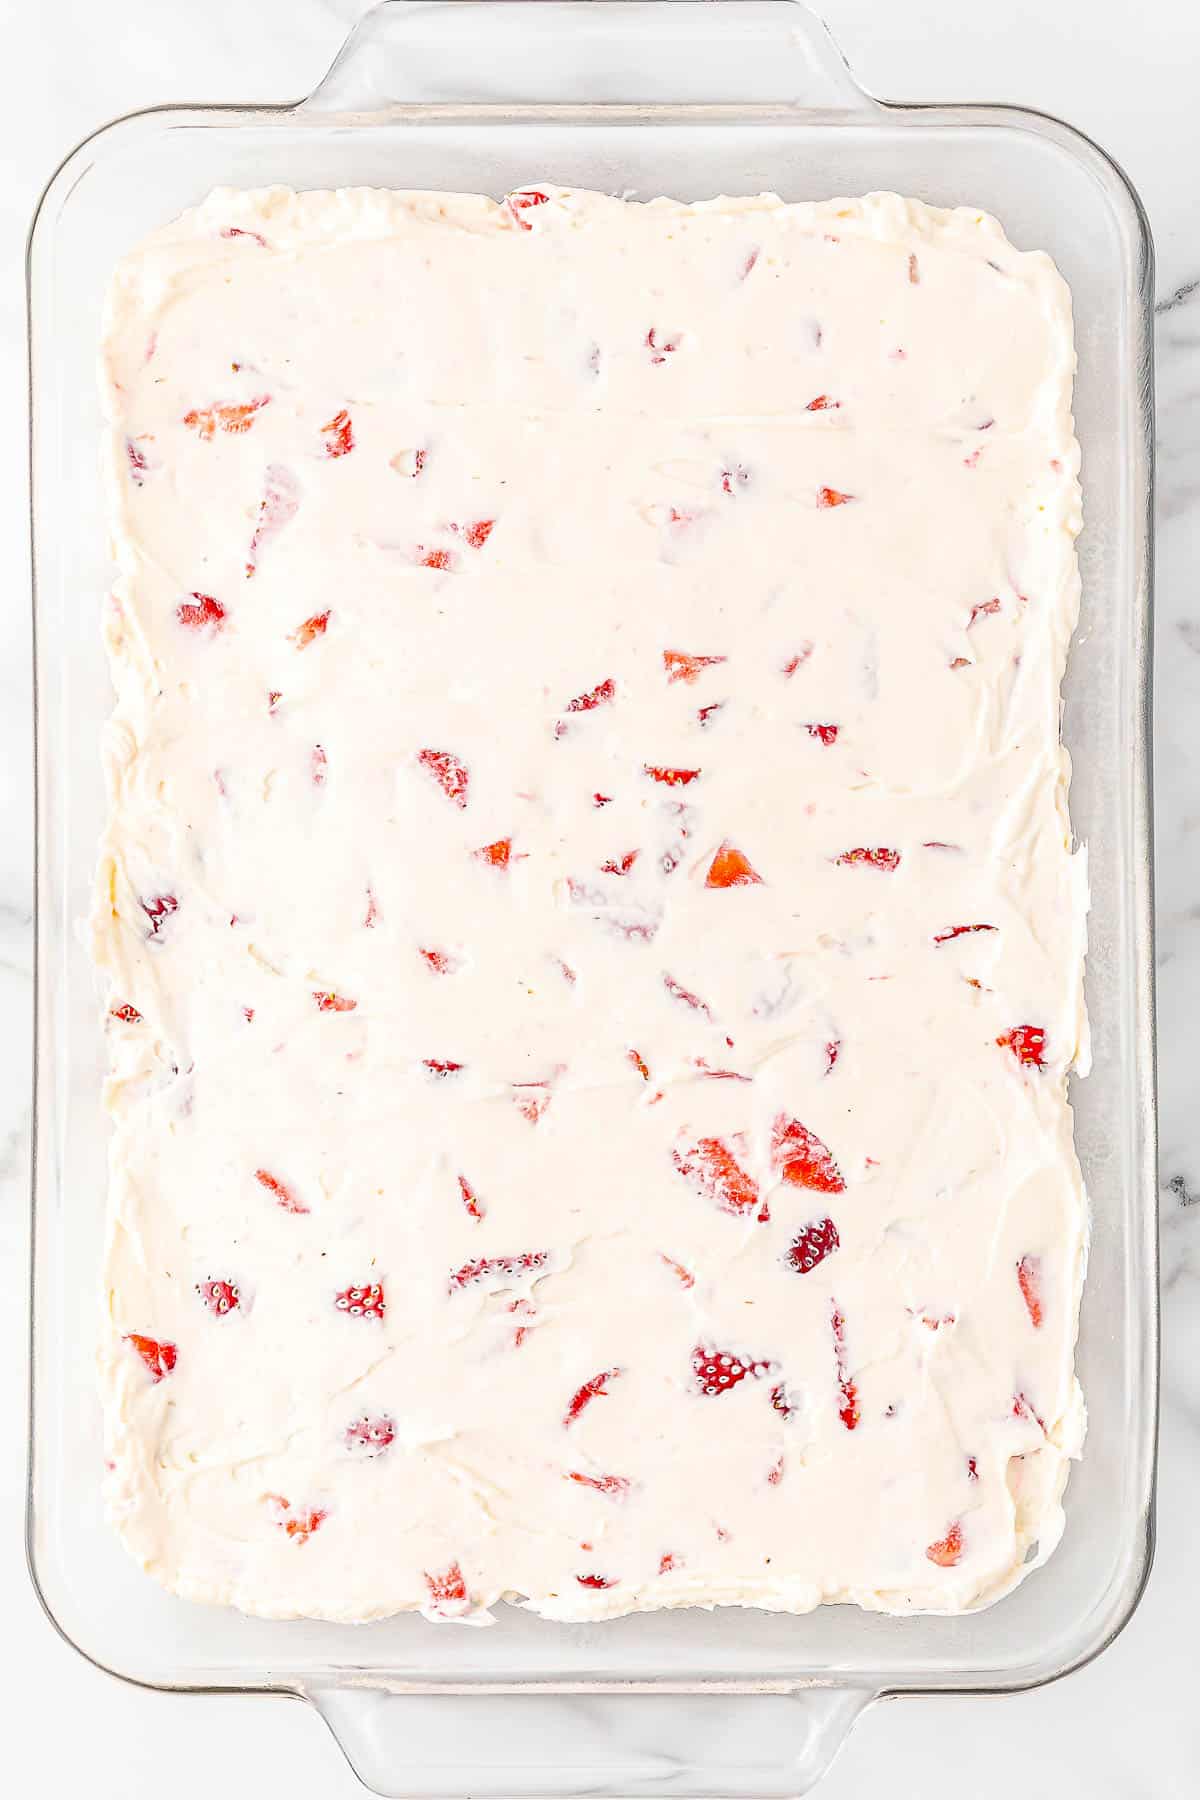 Strawberry delight in baking dish without topping.